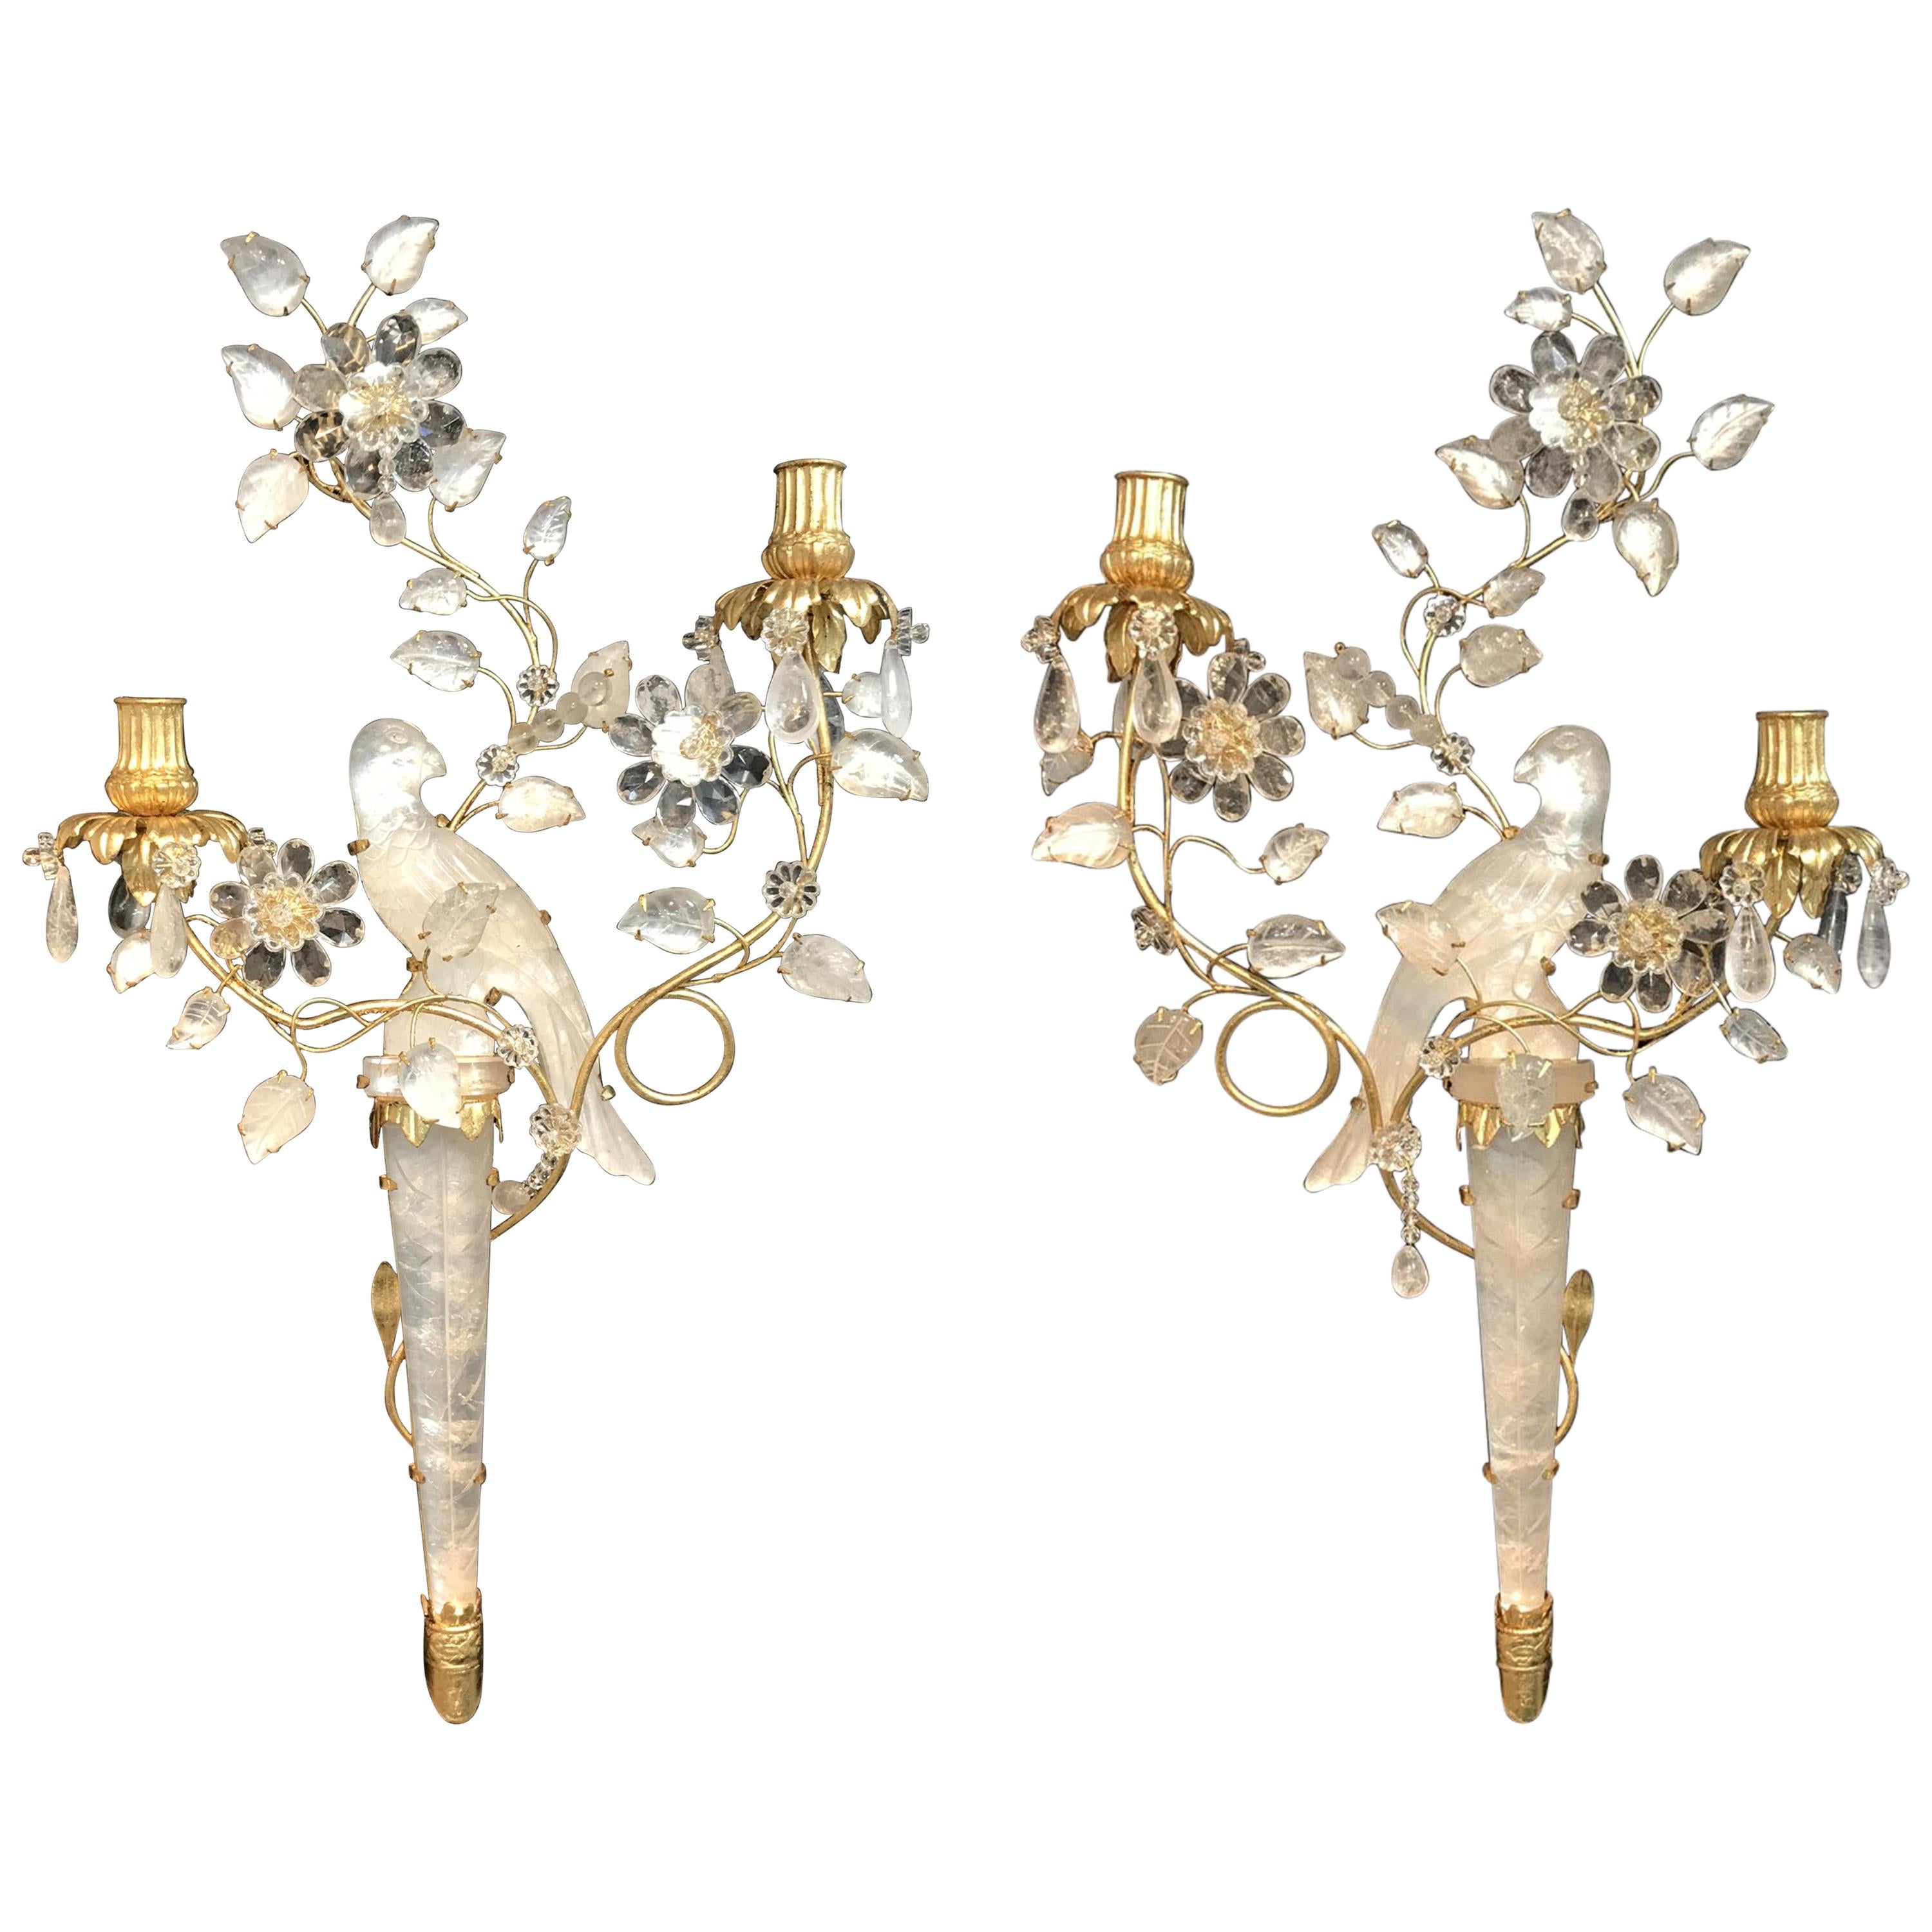 Wonderful Pair of Chinoiserie Rock Crystal Two-Arm Gold Gilt Bird Flower Sconces